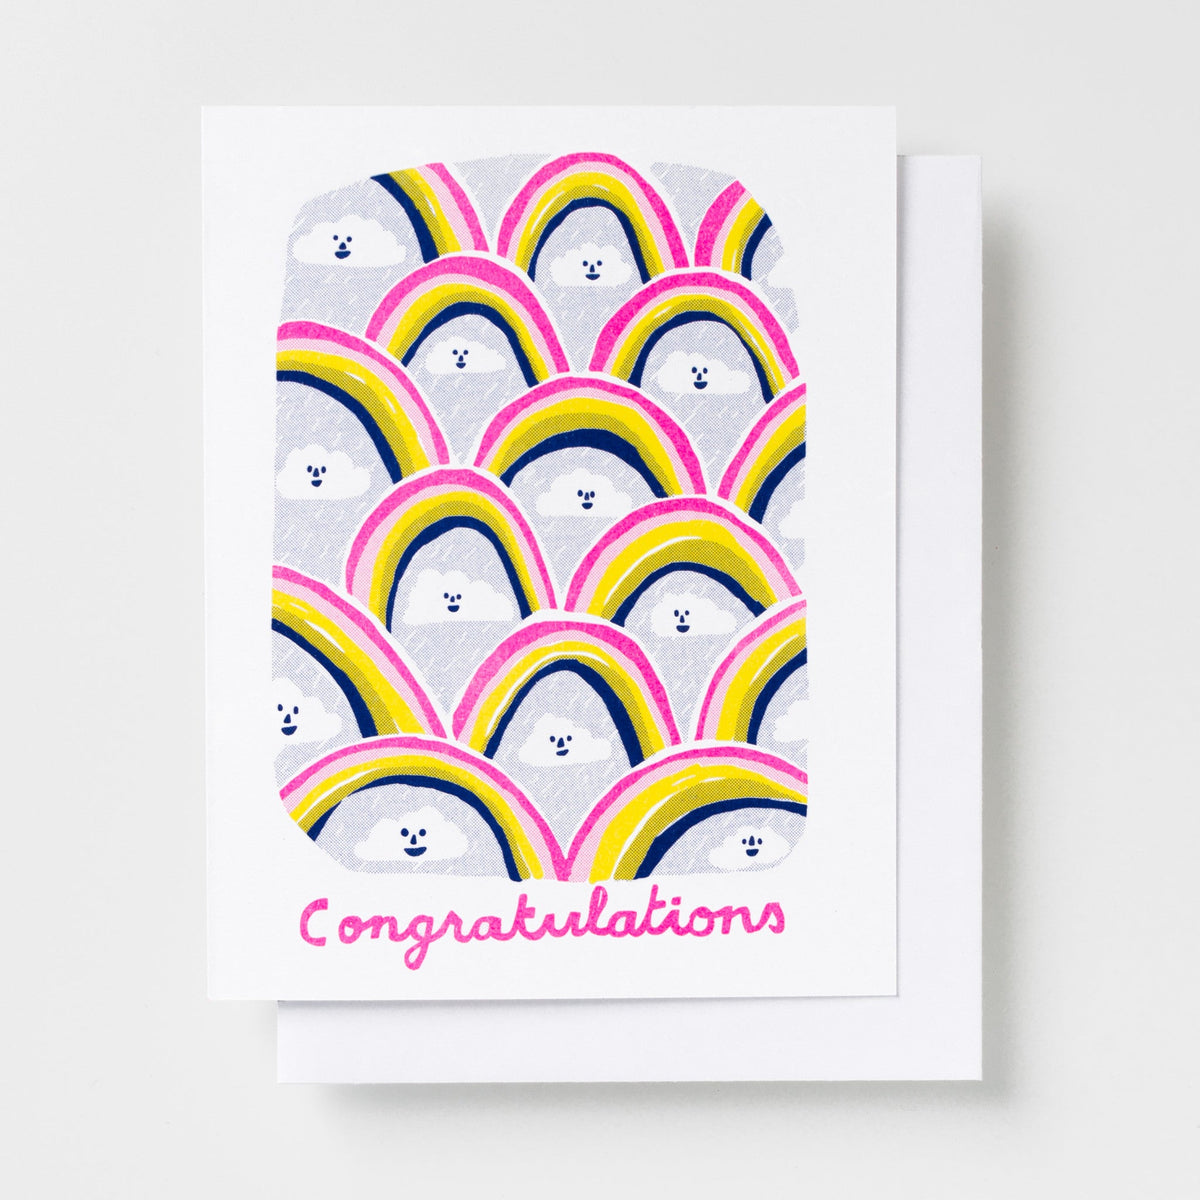 Congratulations Clouds - Risograph Card - Yellow Owl Workshop